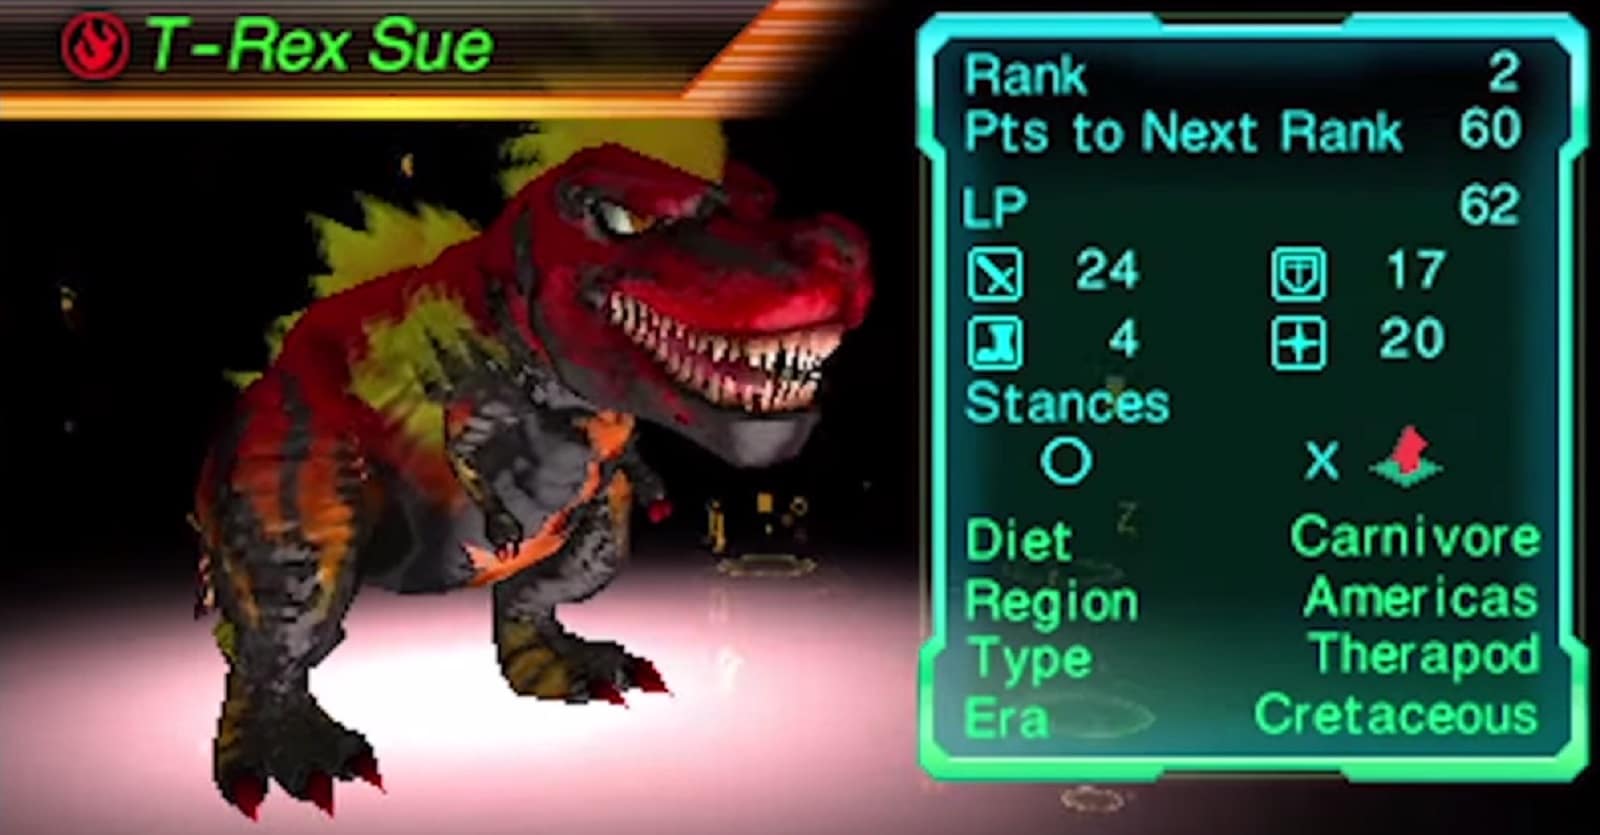 Dinosaurs Stats Fossil Fighters 3: Frontier Vivosaur Revive Gameplay Screenshot 3DS